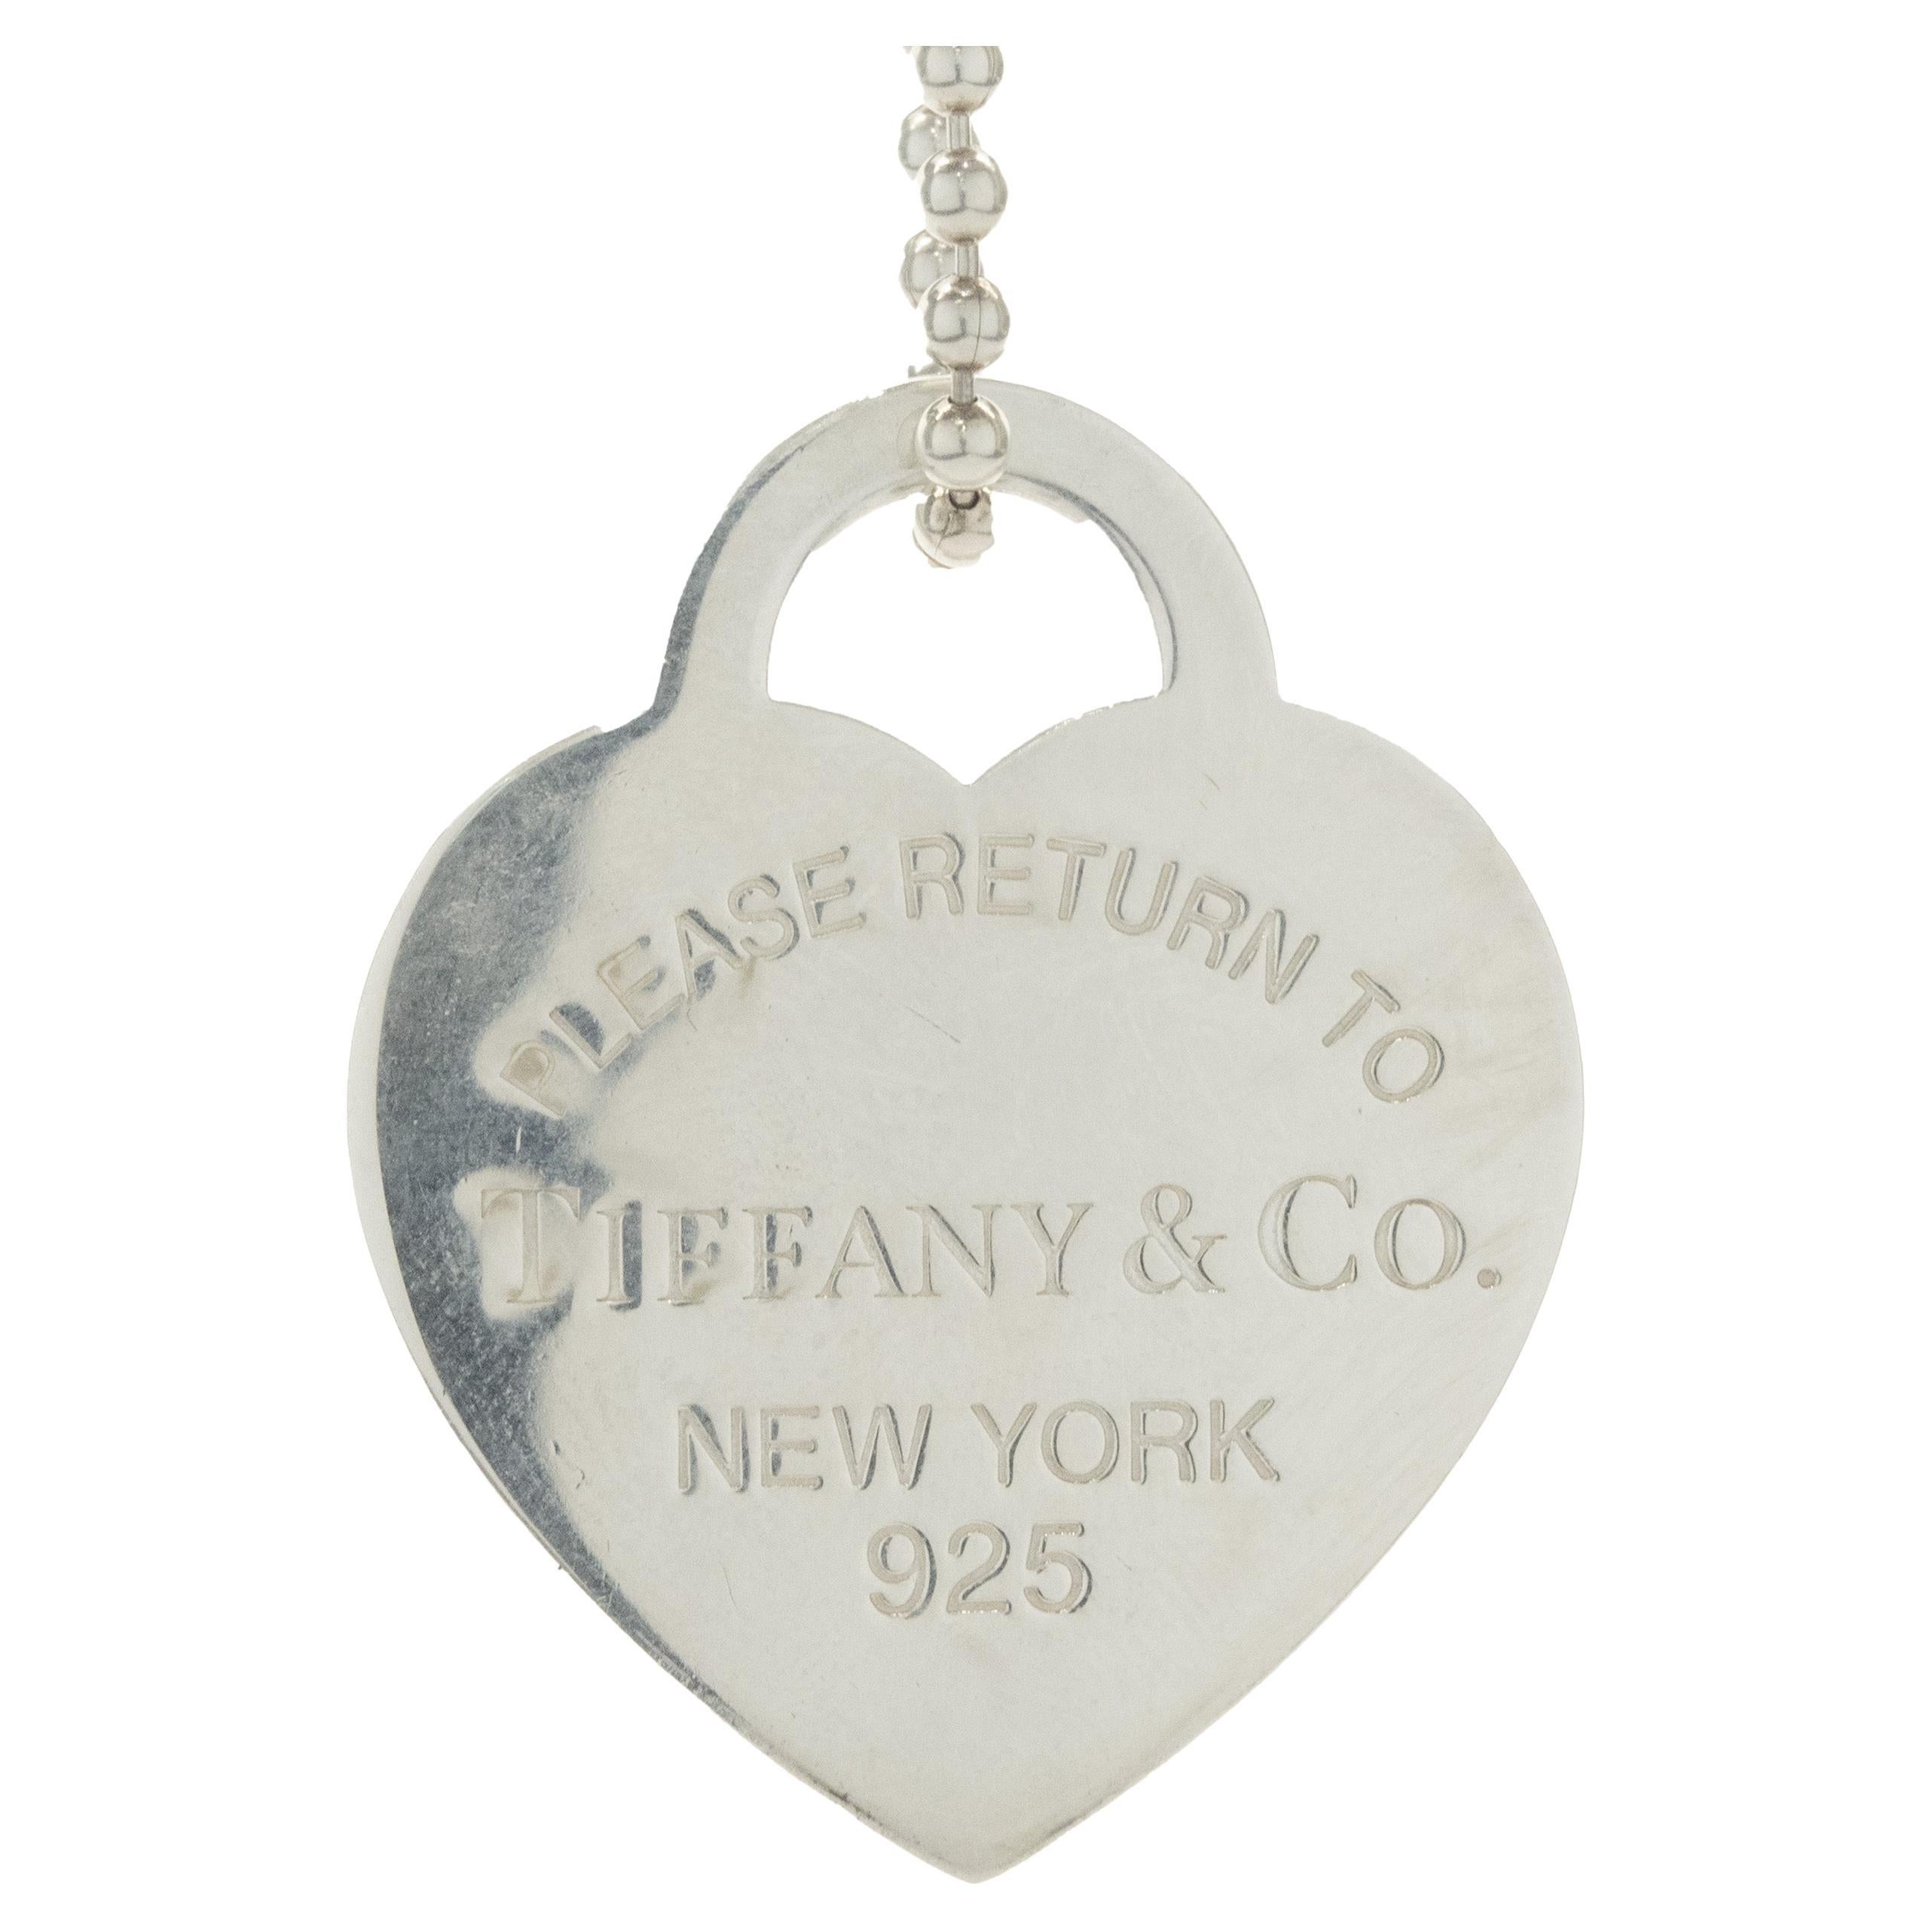 Tiffany & Co., 1.3 Large Return To Heart Tag 16 Necklace